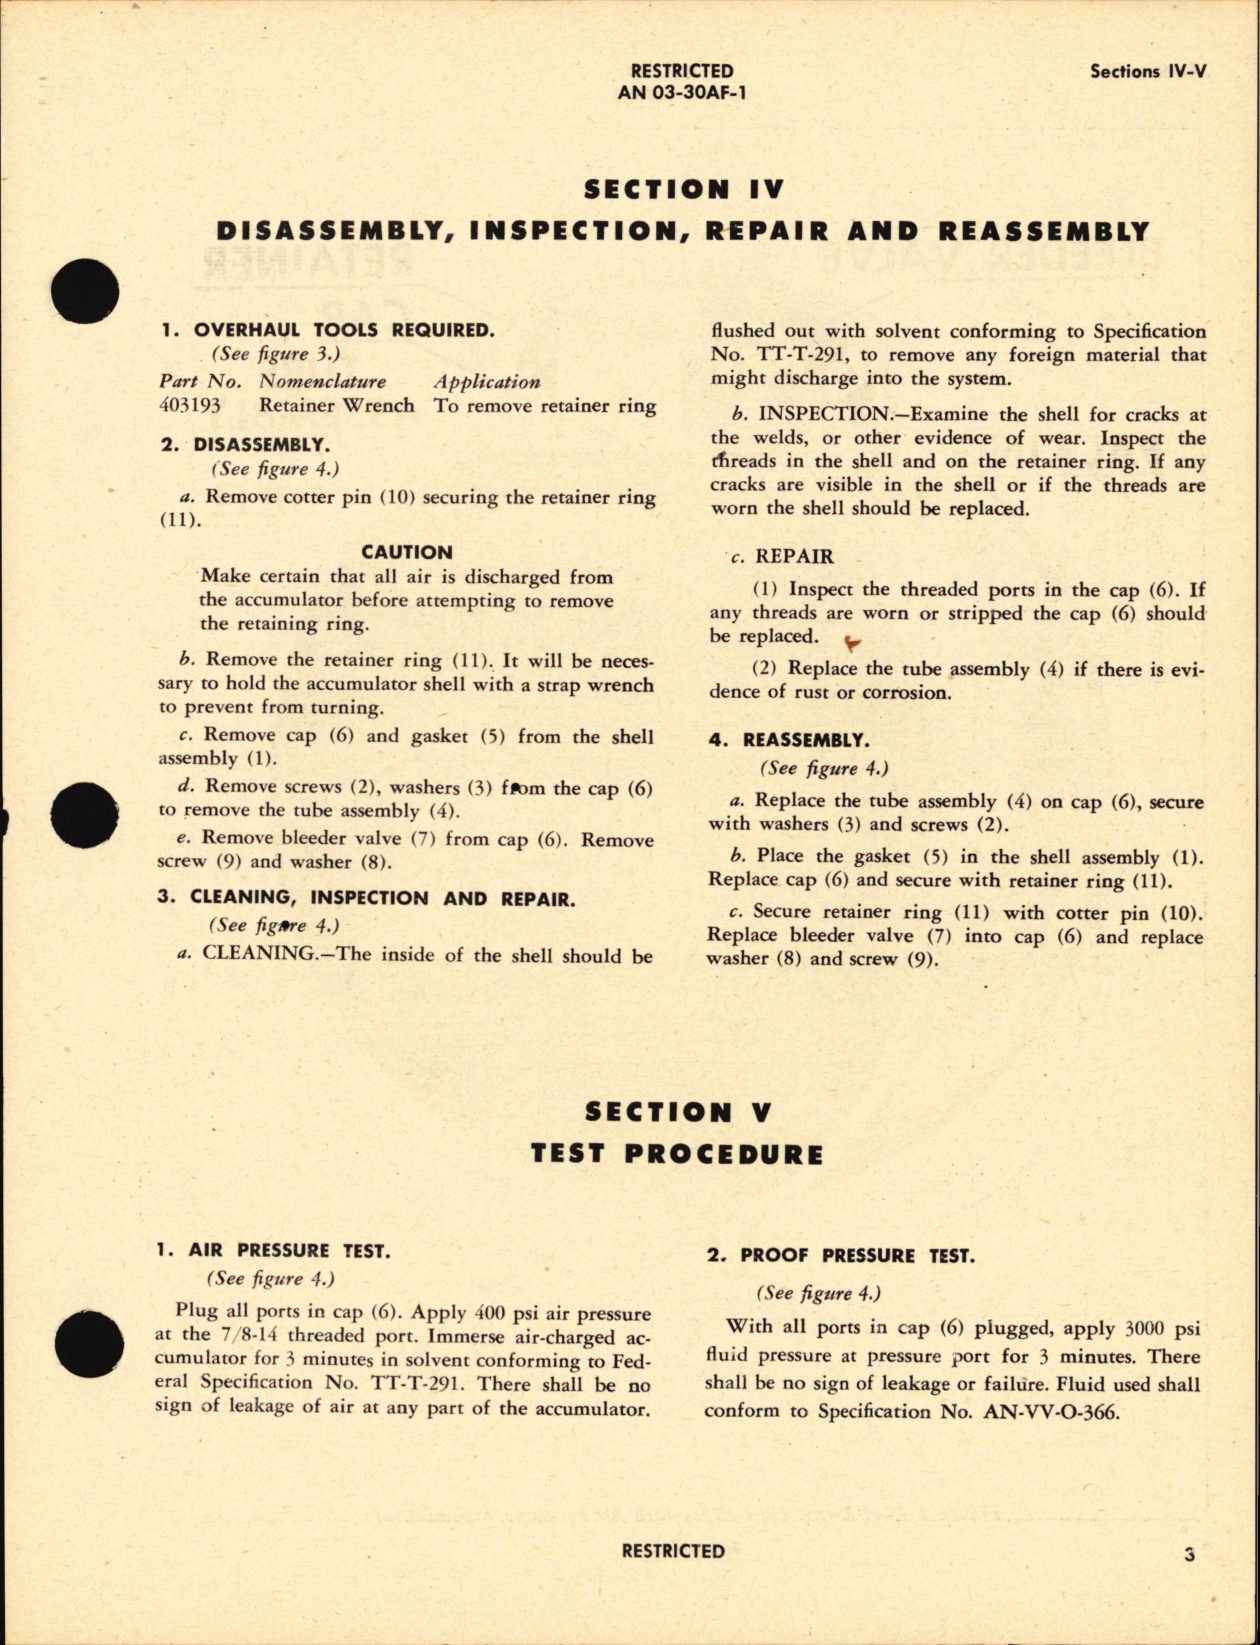 Sample page 7 from AirCorps Library document: Handbook of Overhaul Instructions with Parts Catalog for Air Pressure Accumulator NO. 405031